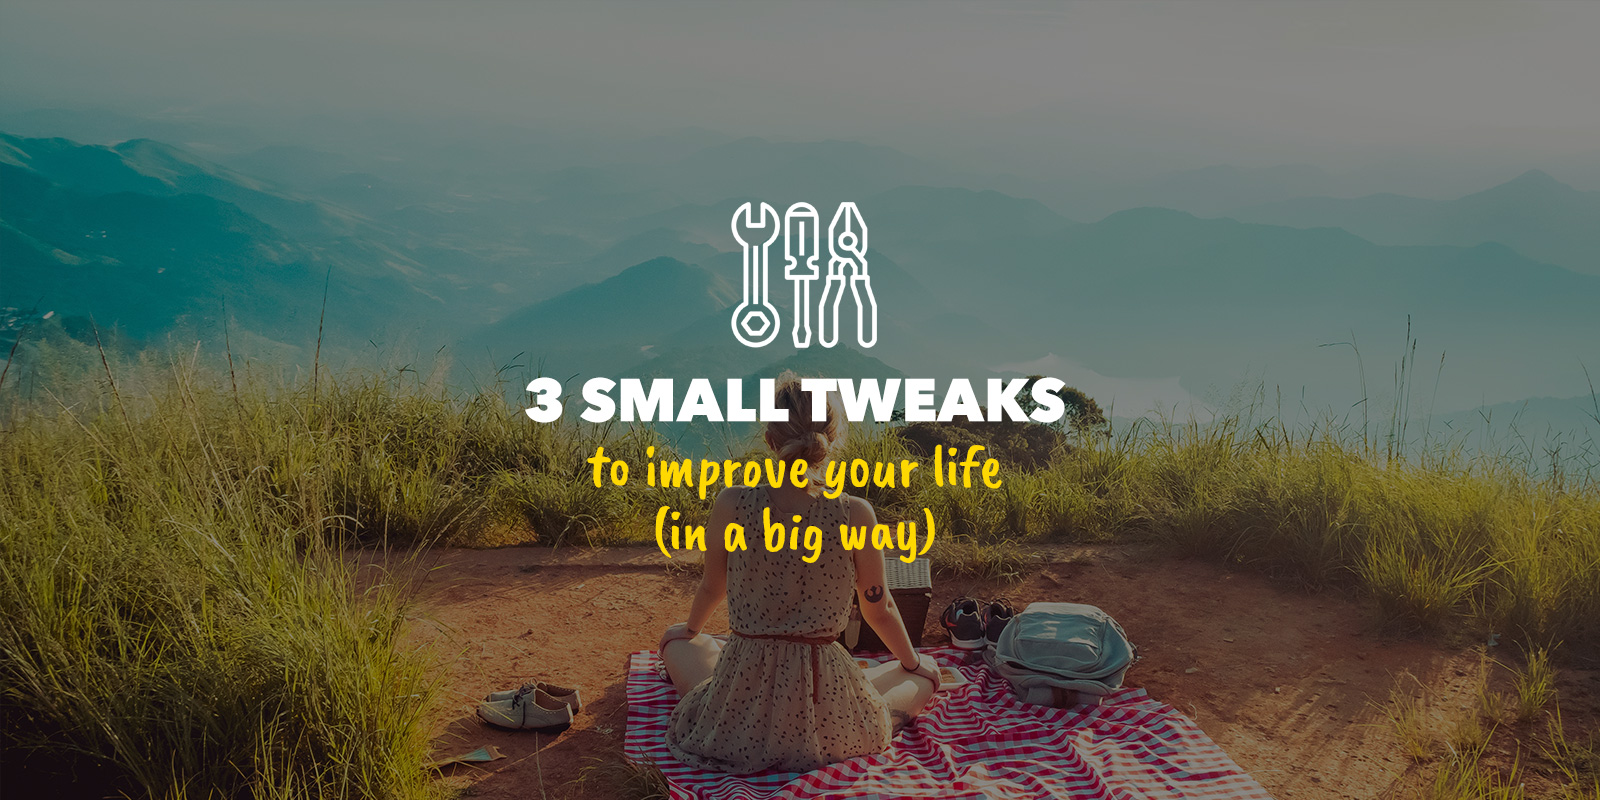 3 small tweaks to improve your life in a big way